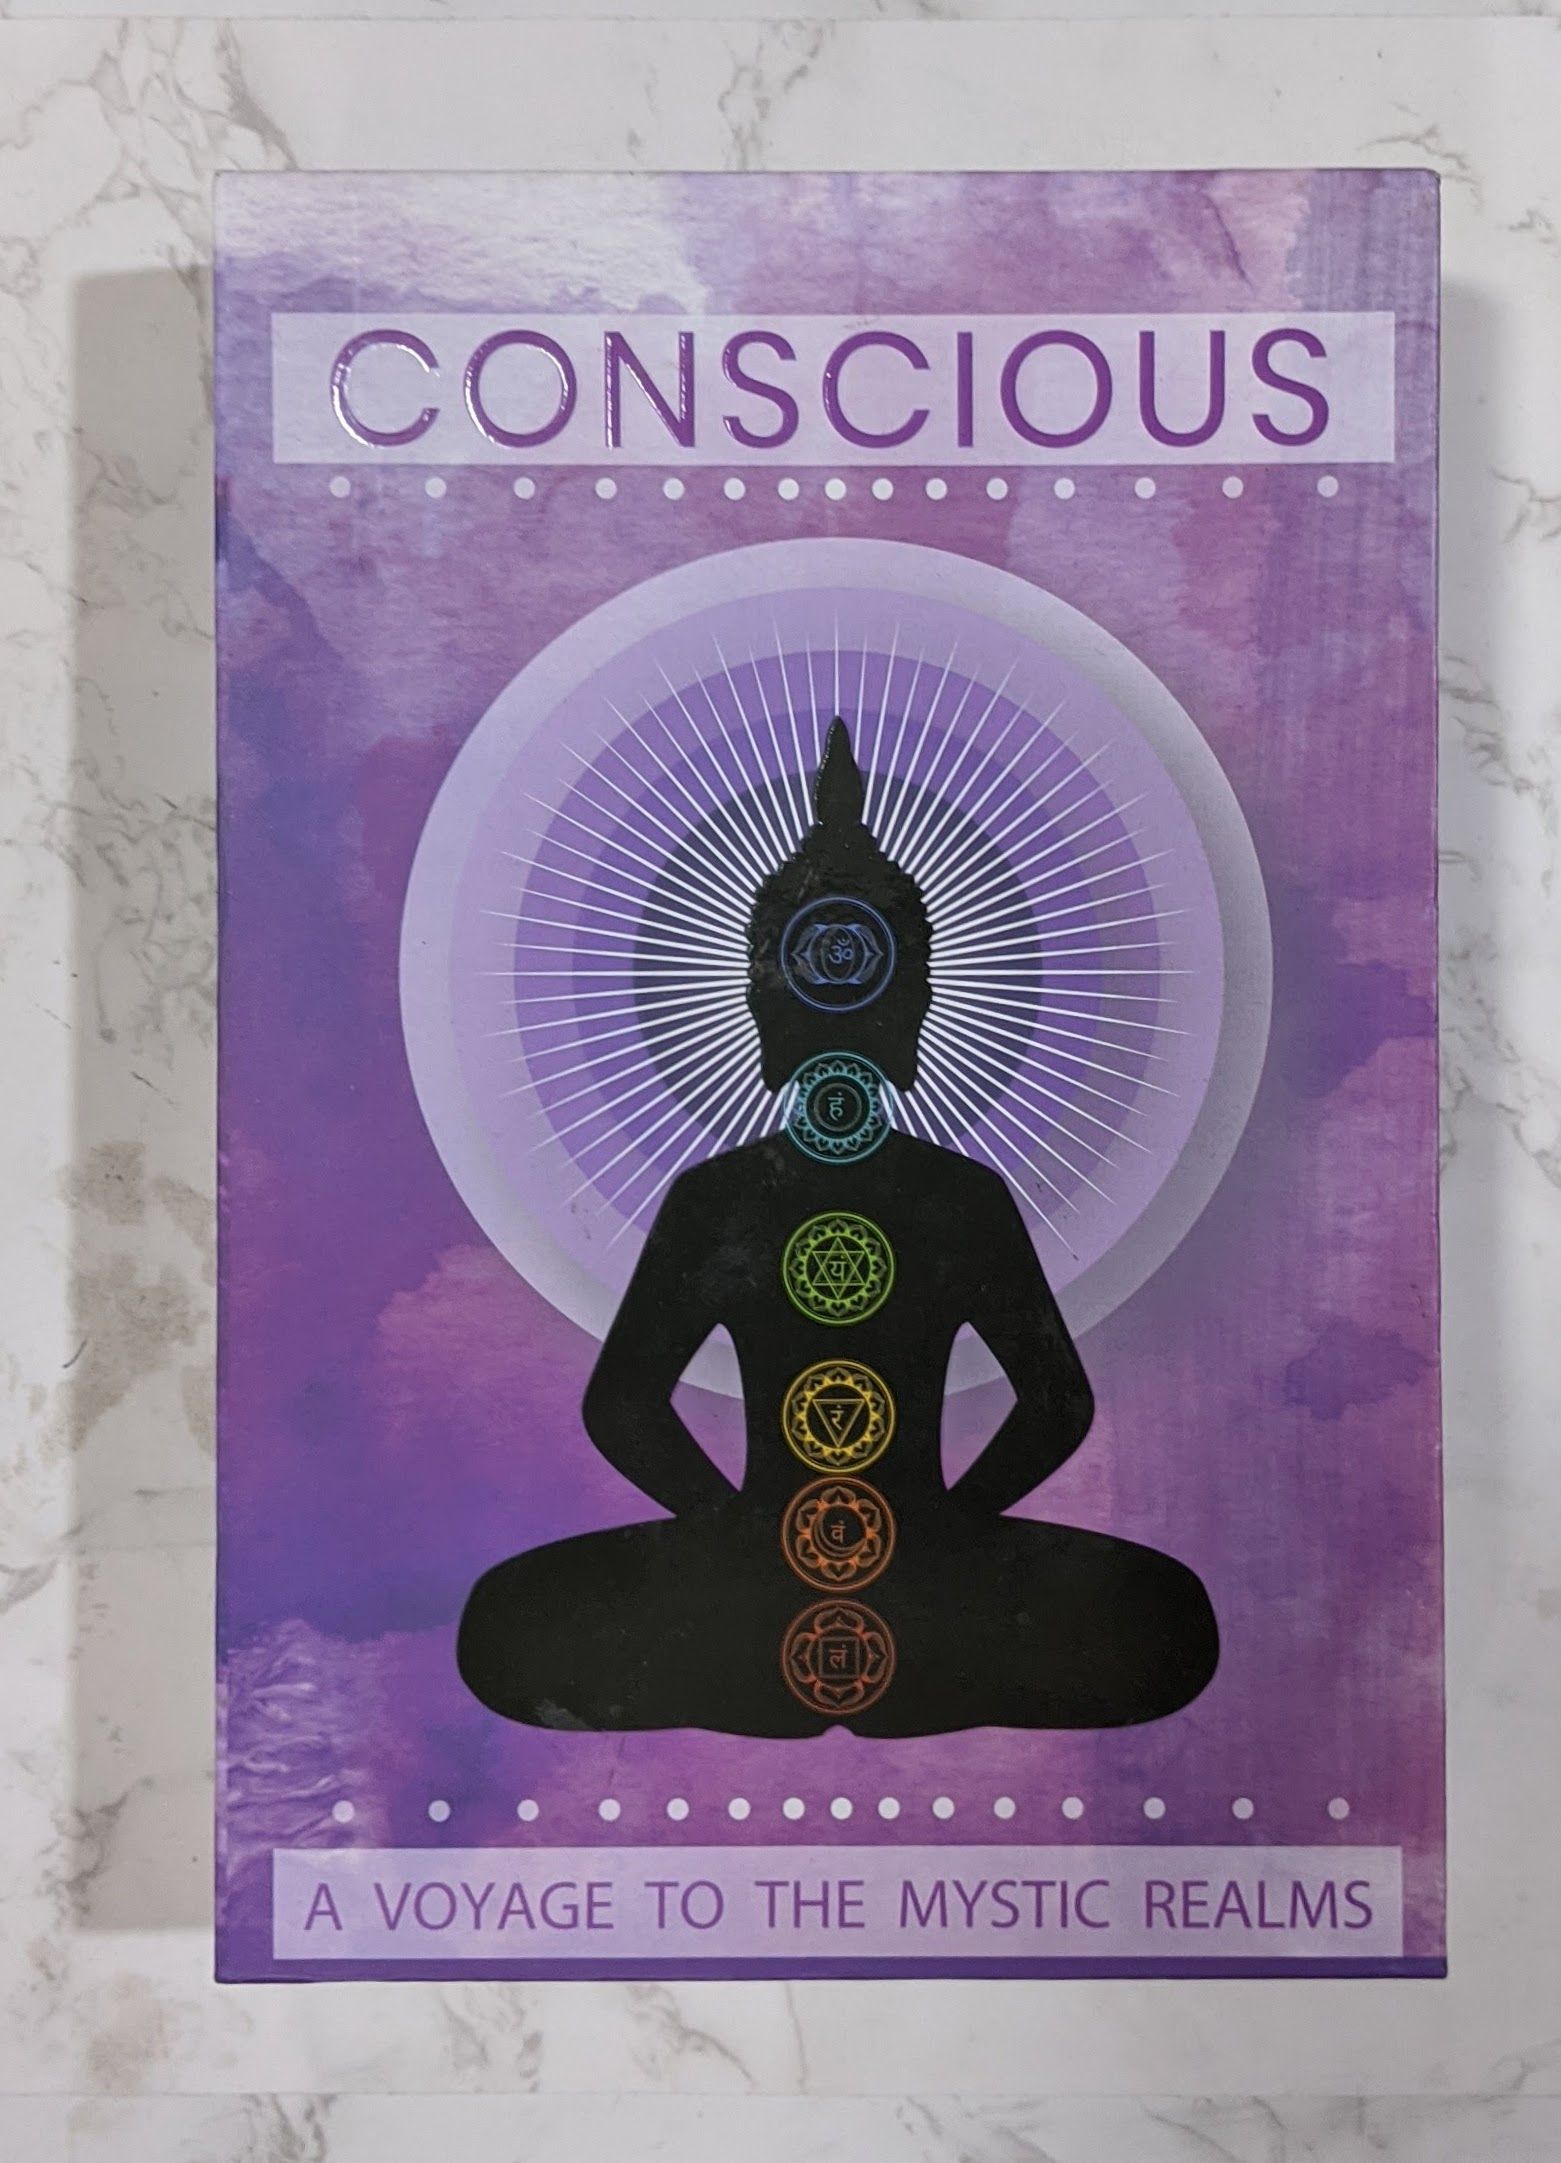 Conscious: A Voyage to the Mystic Realms